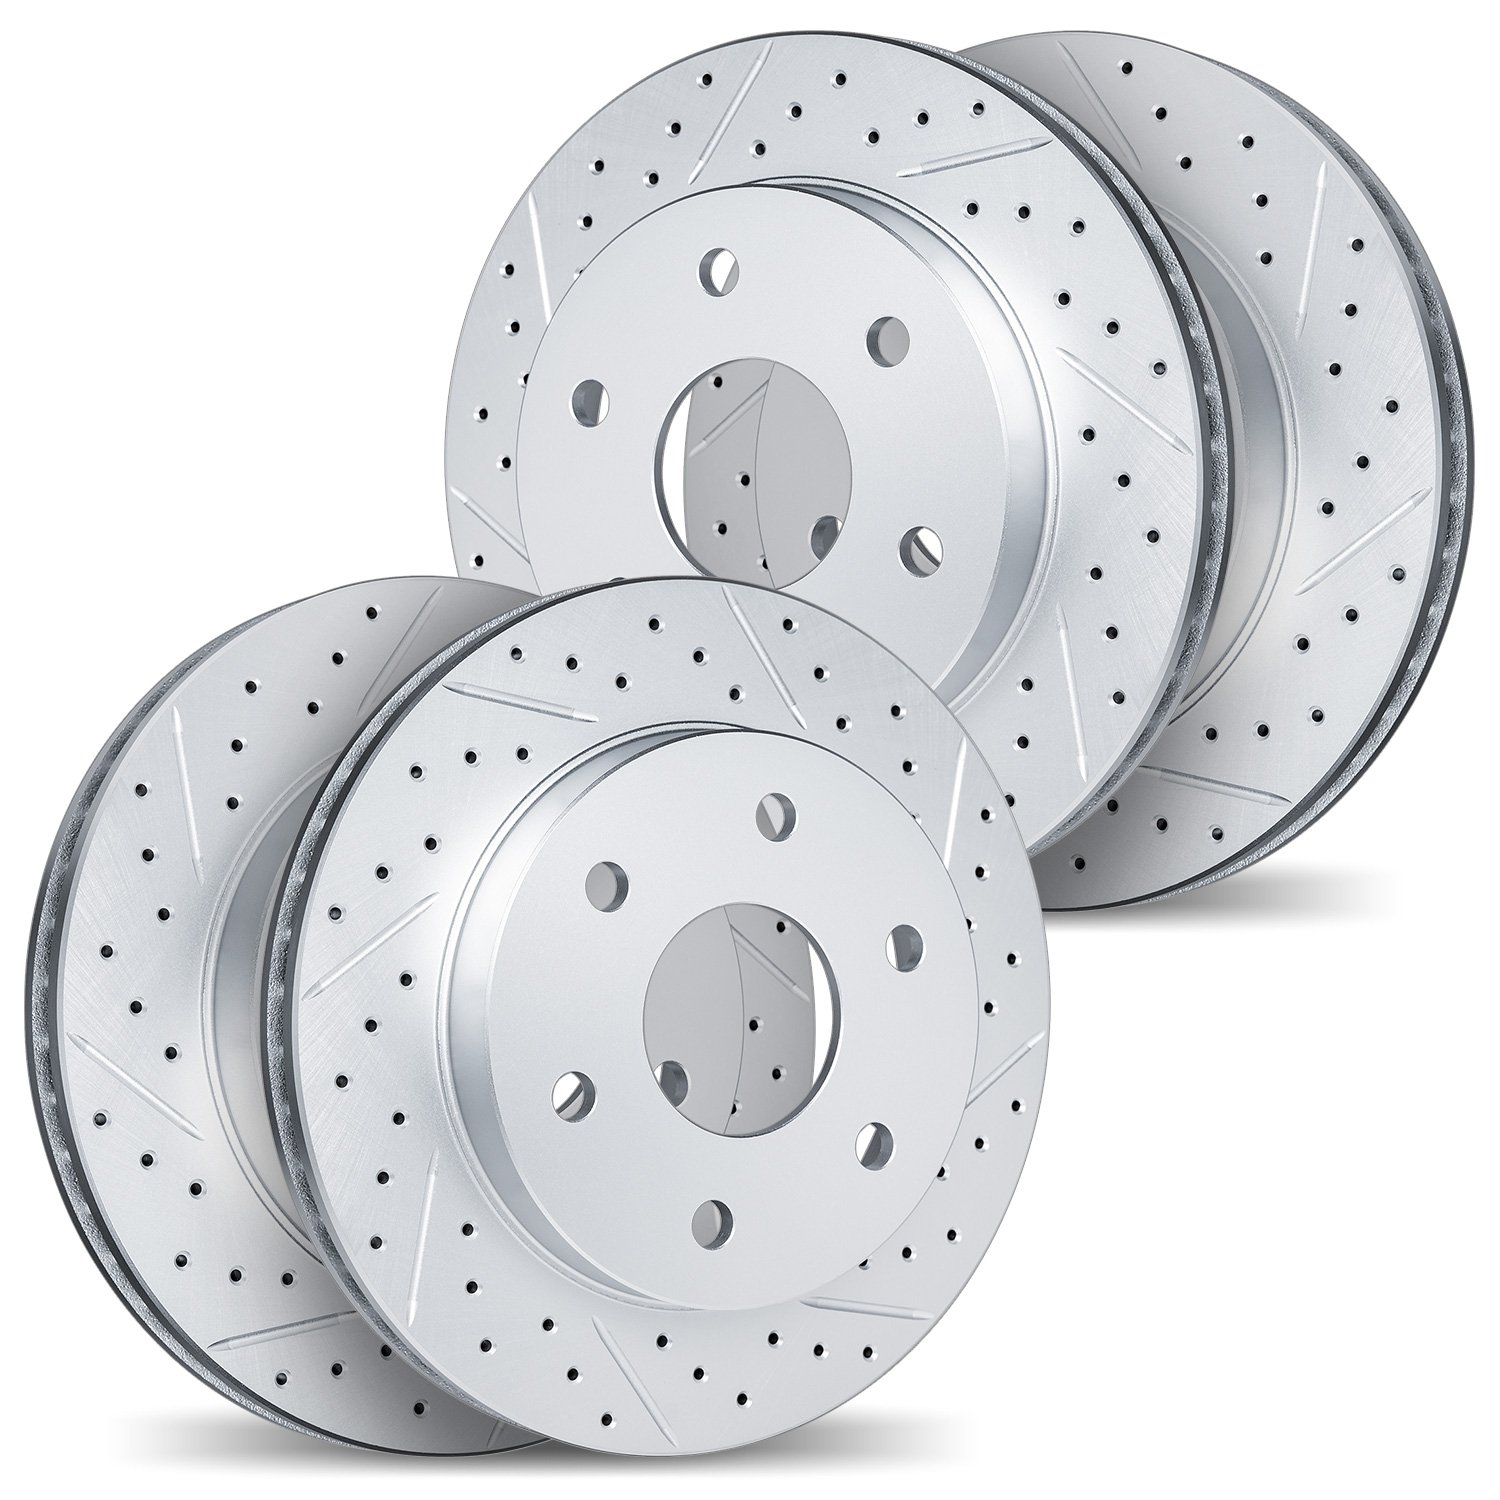 2004-76031 Geoperformance Drilled/Slotted Brake Rotors, 2003-2009 Lexus/Toyota/Scion, Position: Front and Rear